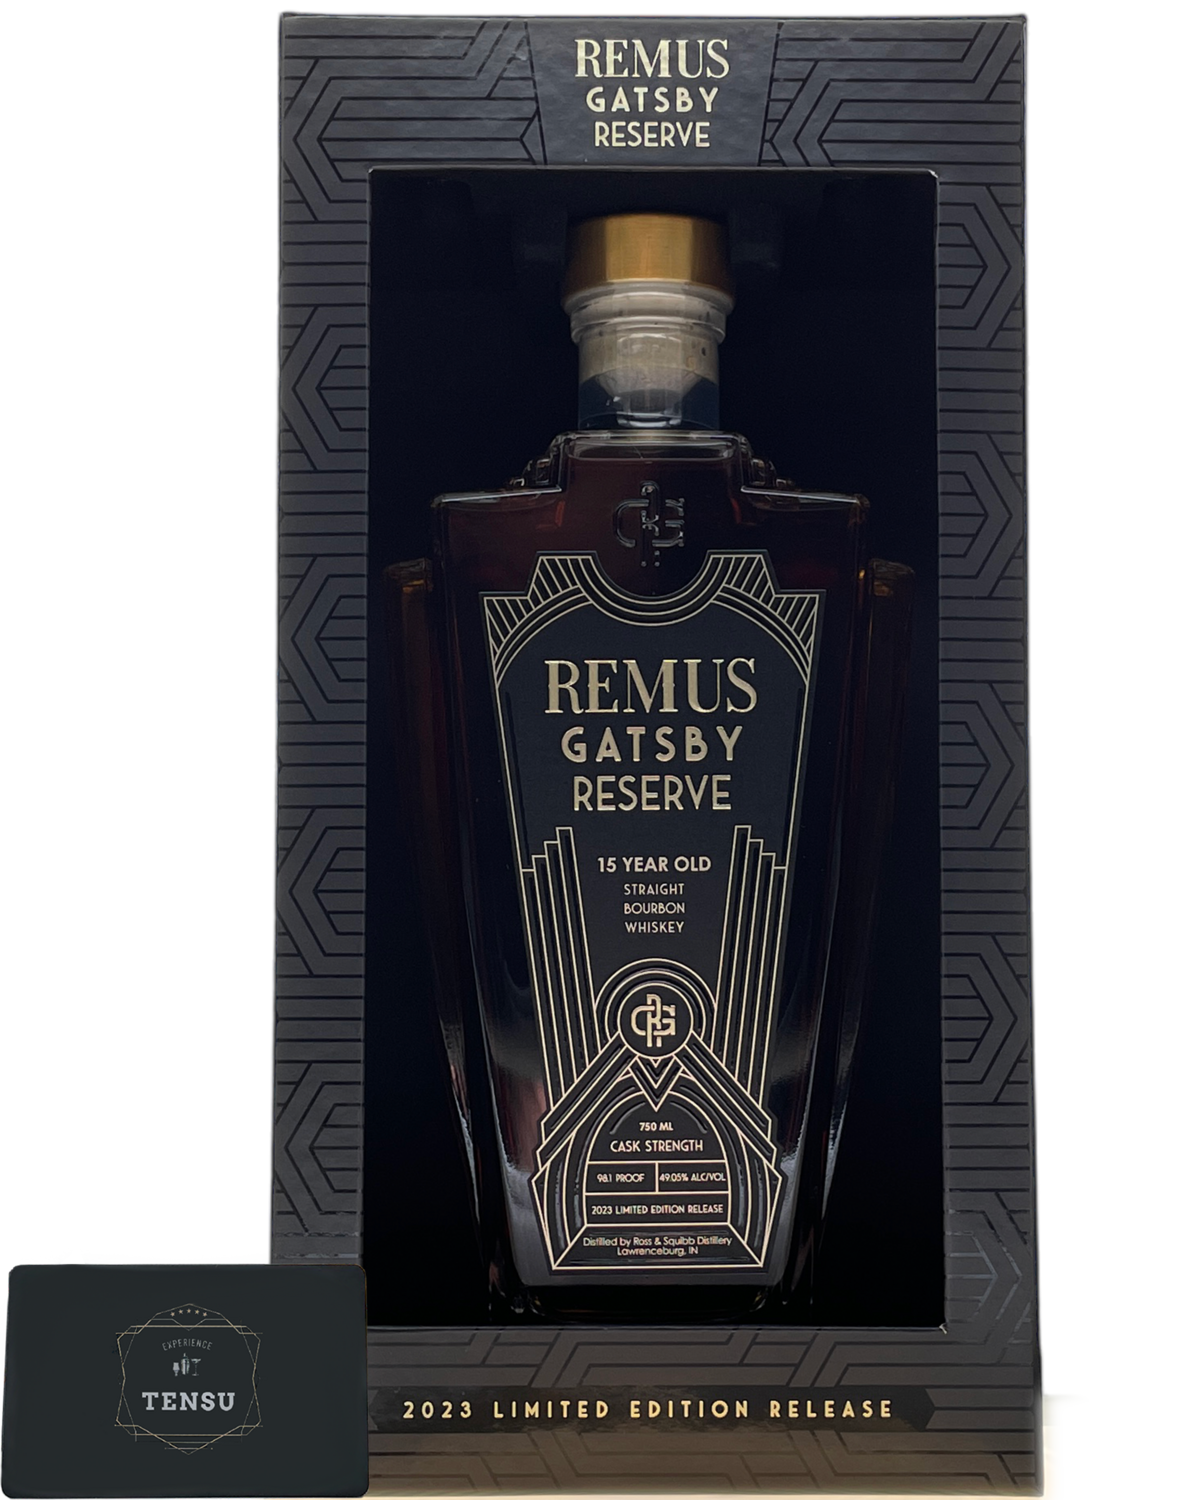 Remus Gatsby Reserve 15 Years Old -Straight Bourbon Whiskey- (2023) Limited Edition Cask Strength 49.05 "OB"